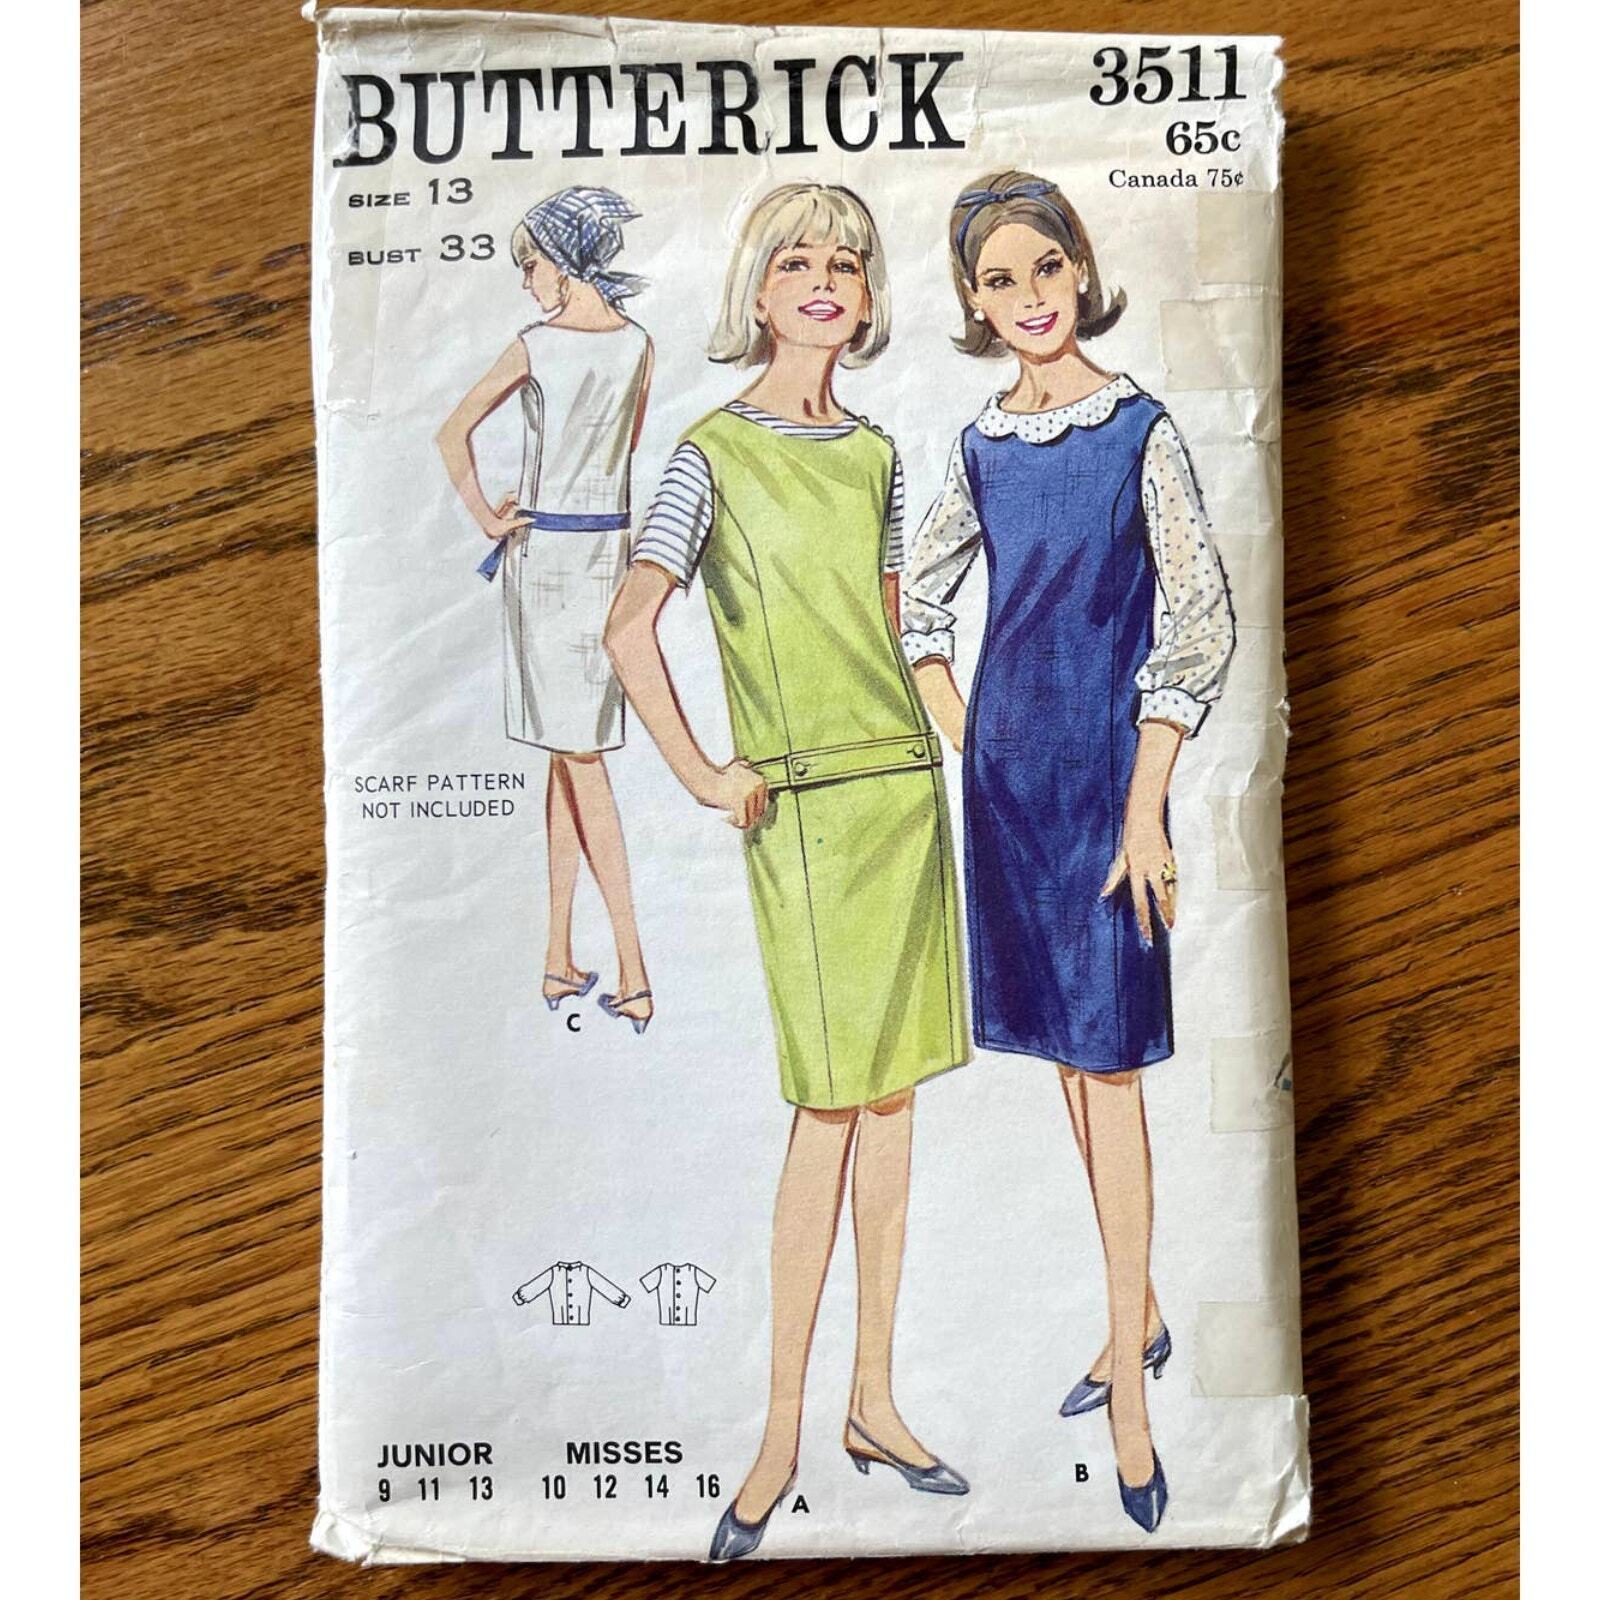 Vintage 1960s Butterick 3511 Sewing Pattern Size XS Dress Jumper Blouse COMPLETE